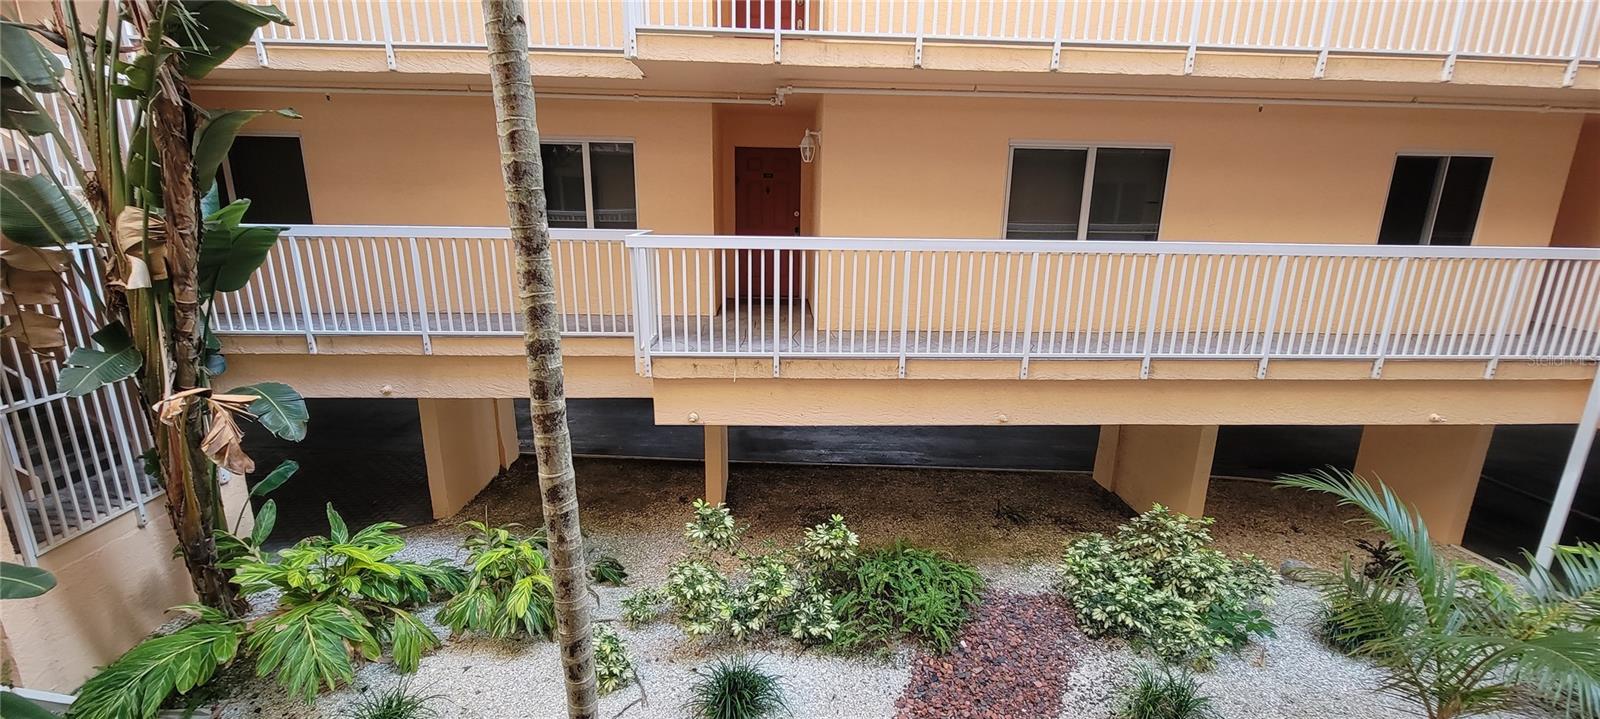 Condo 1104 entrance at center, owner parking surface lot below buildings and pool deck